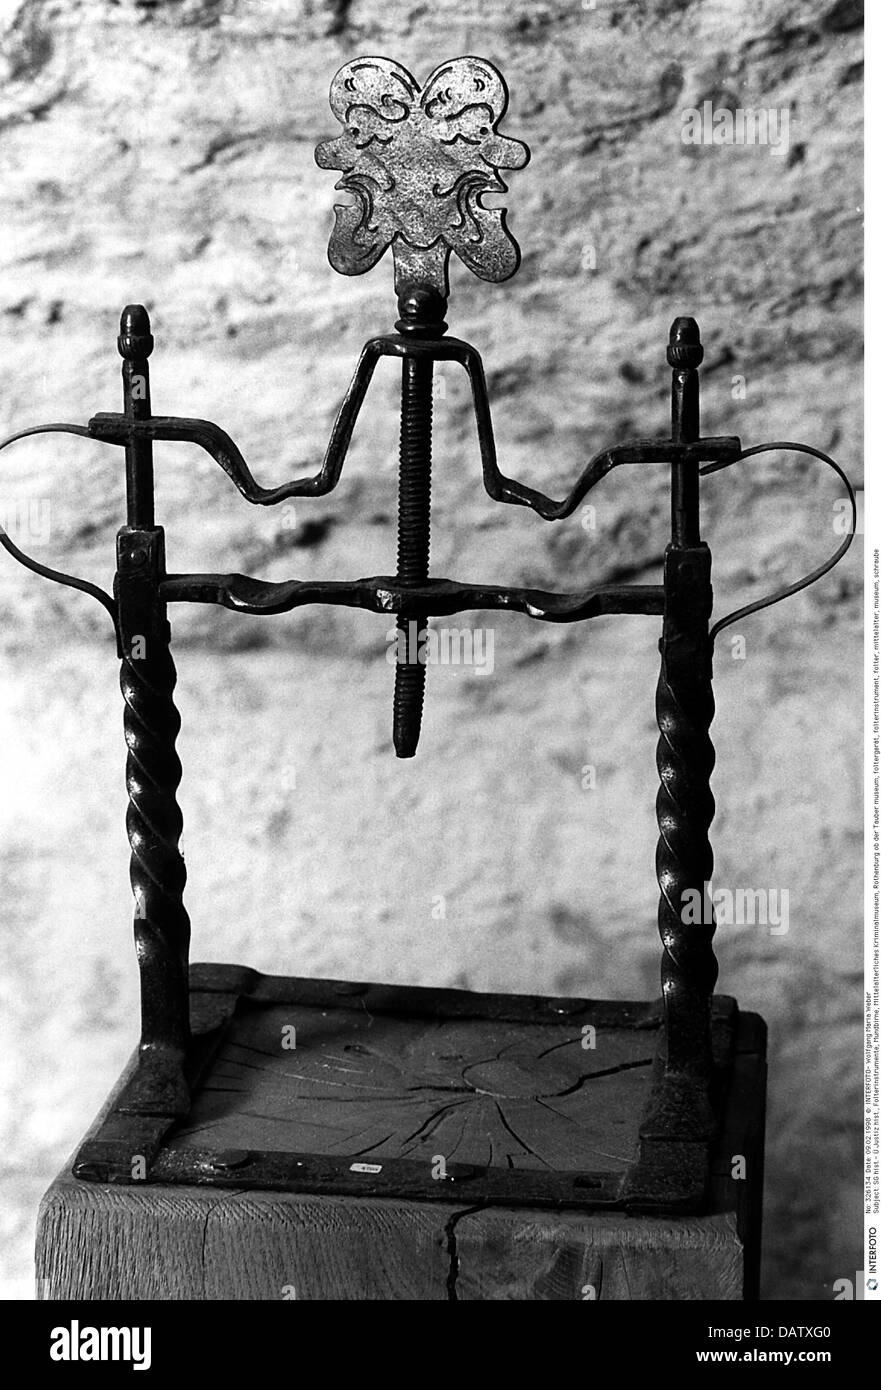 justice, instrument of torture, choke pear, museum of medieval crimes, Rothenburg ob der Tauber, historic, historical, thumbscrews, torture device, instruments of torture, torture devices, medieval times, Middle Ages, technics, pear of anguish, Additional-Rights-Clearences-Not Available Stock Photo